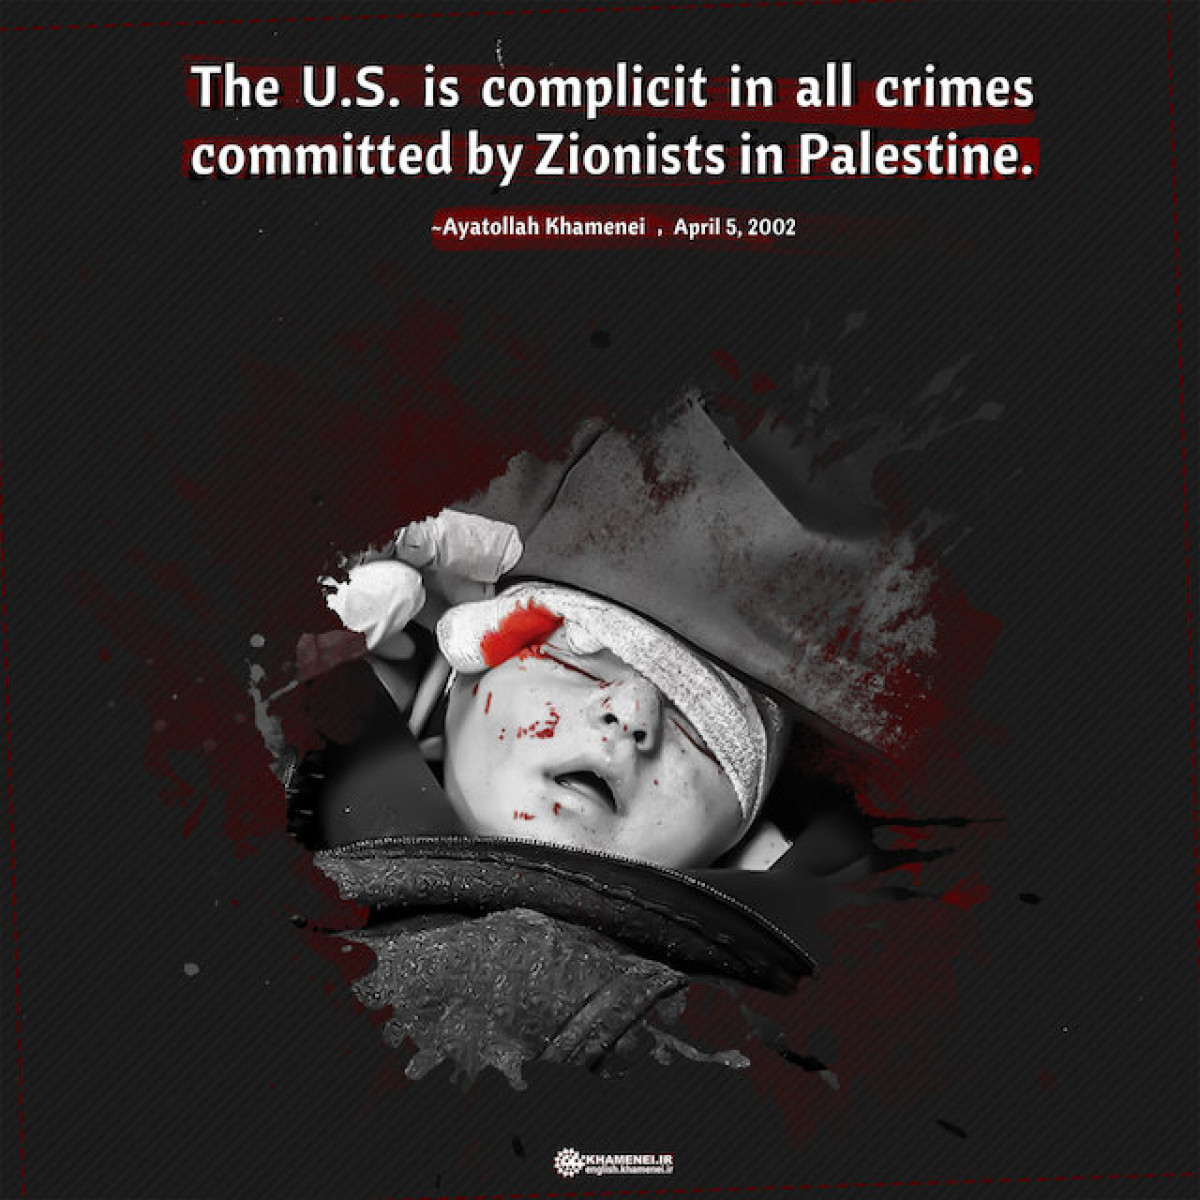 The U.S. is complicit in all crimes committed by Zionists in Palestine